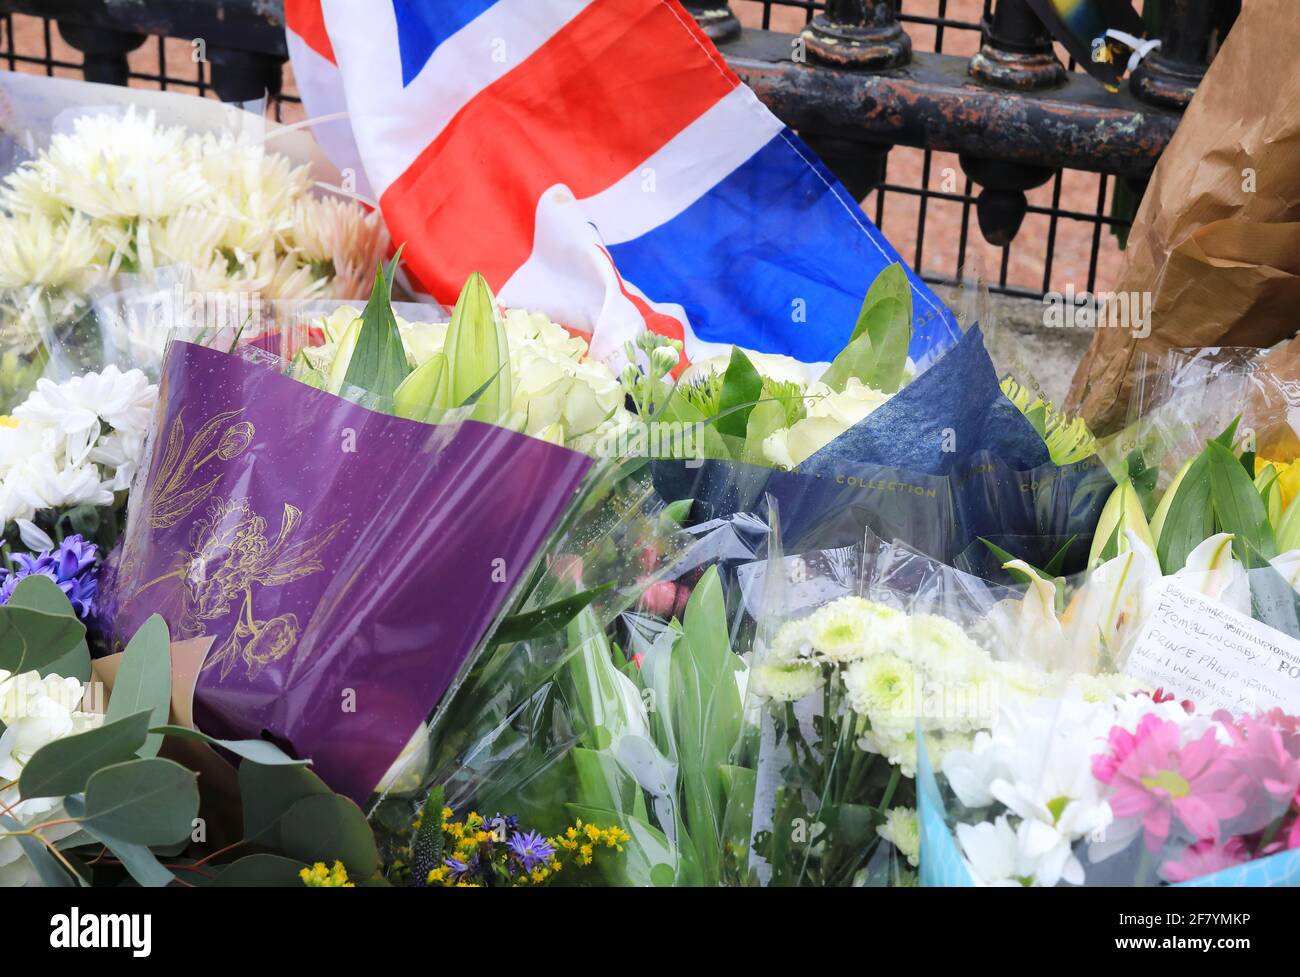 London, UK, April 10th 2021. People queued up to lay flowers outside the gates of Buckingham palace to pay their respects and remember HRH Prince Philip who died on Friday aged 99. Monica Wells/Alamy Live News Stock Photo